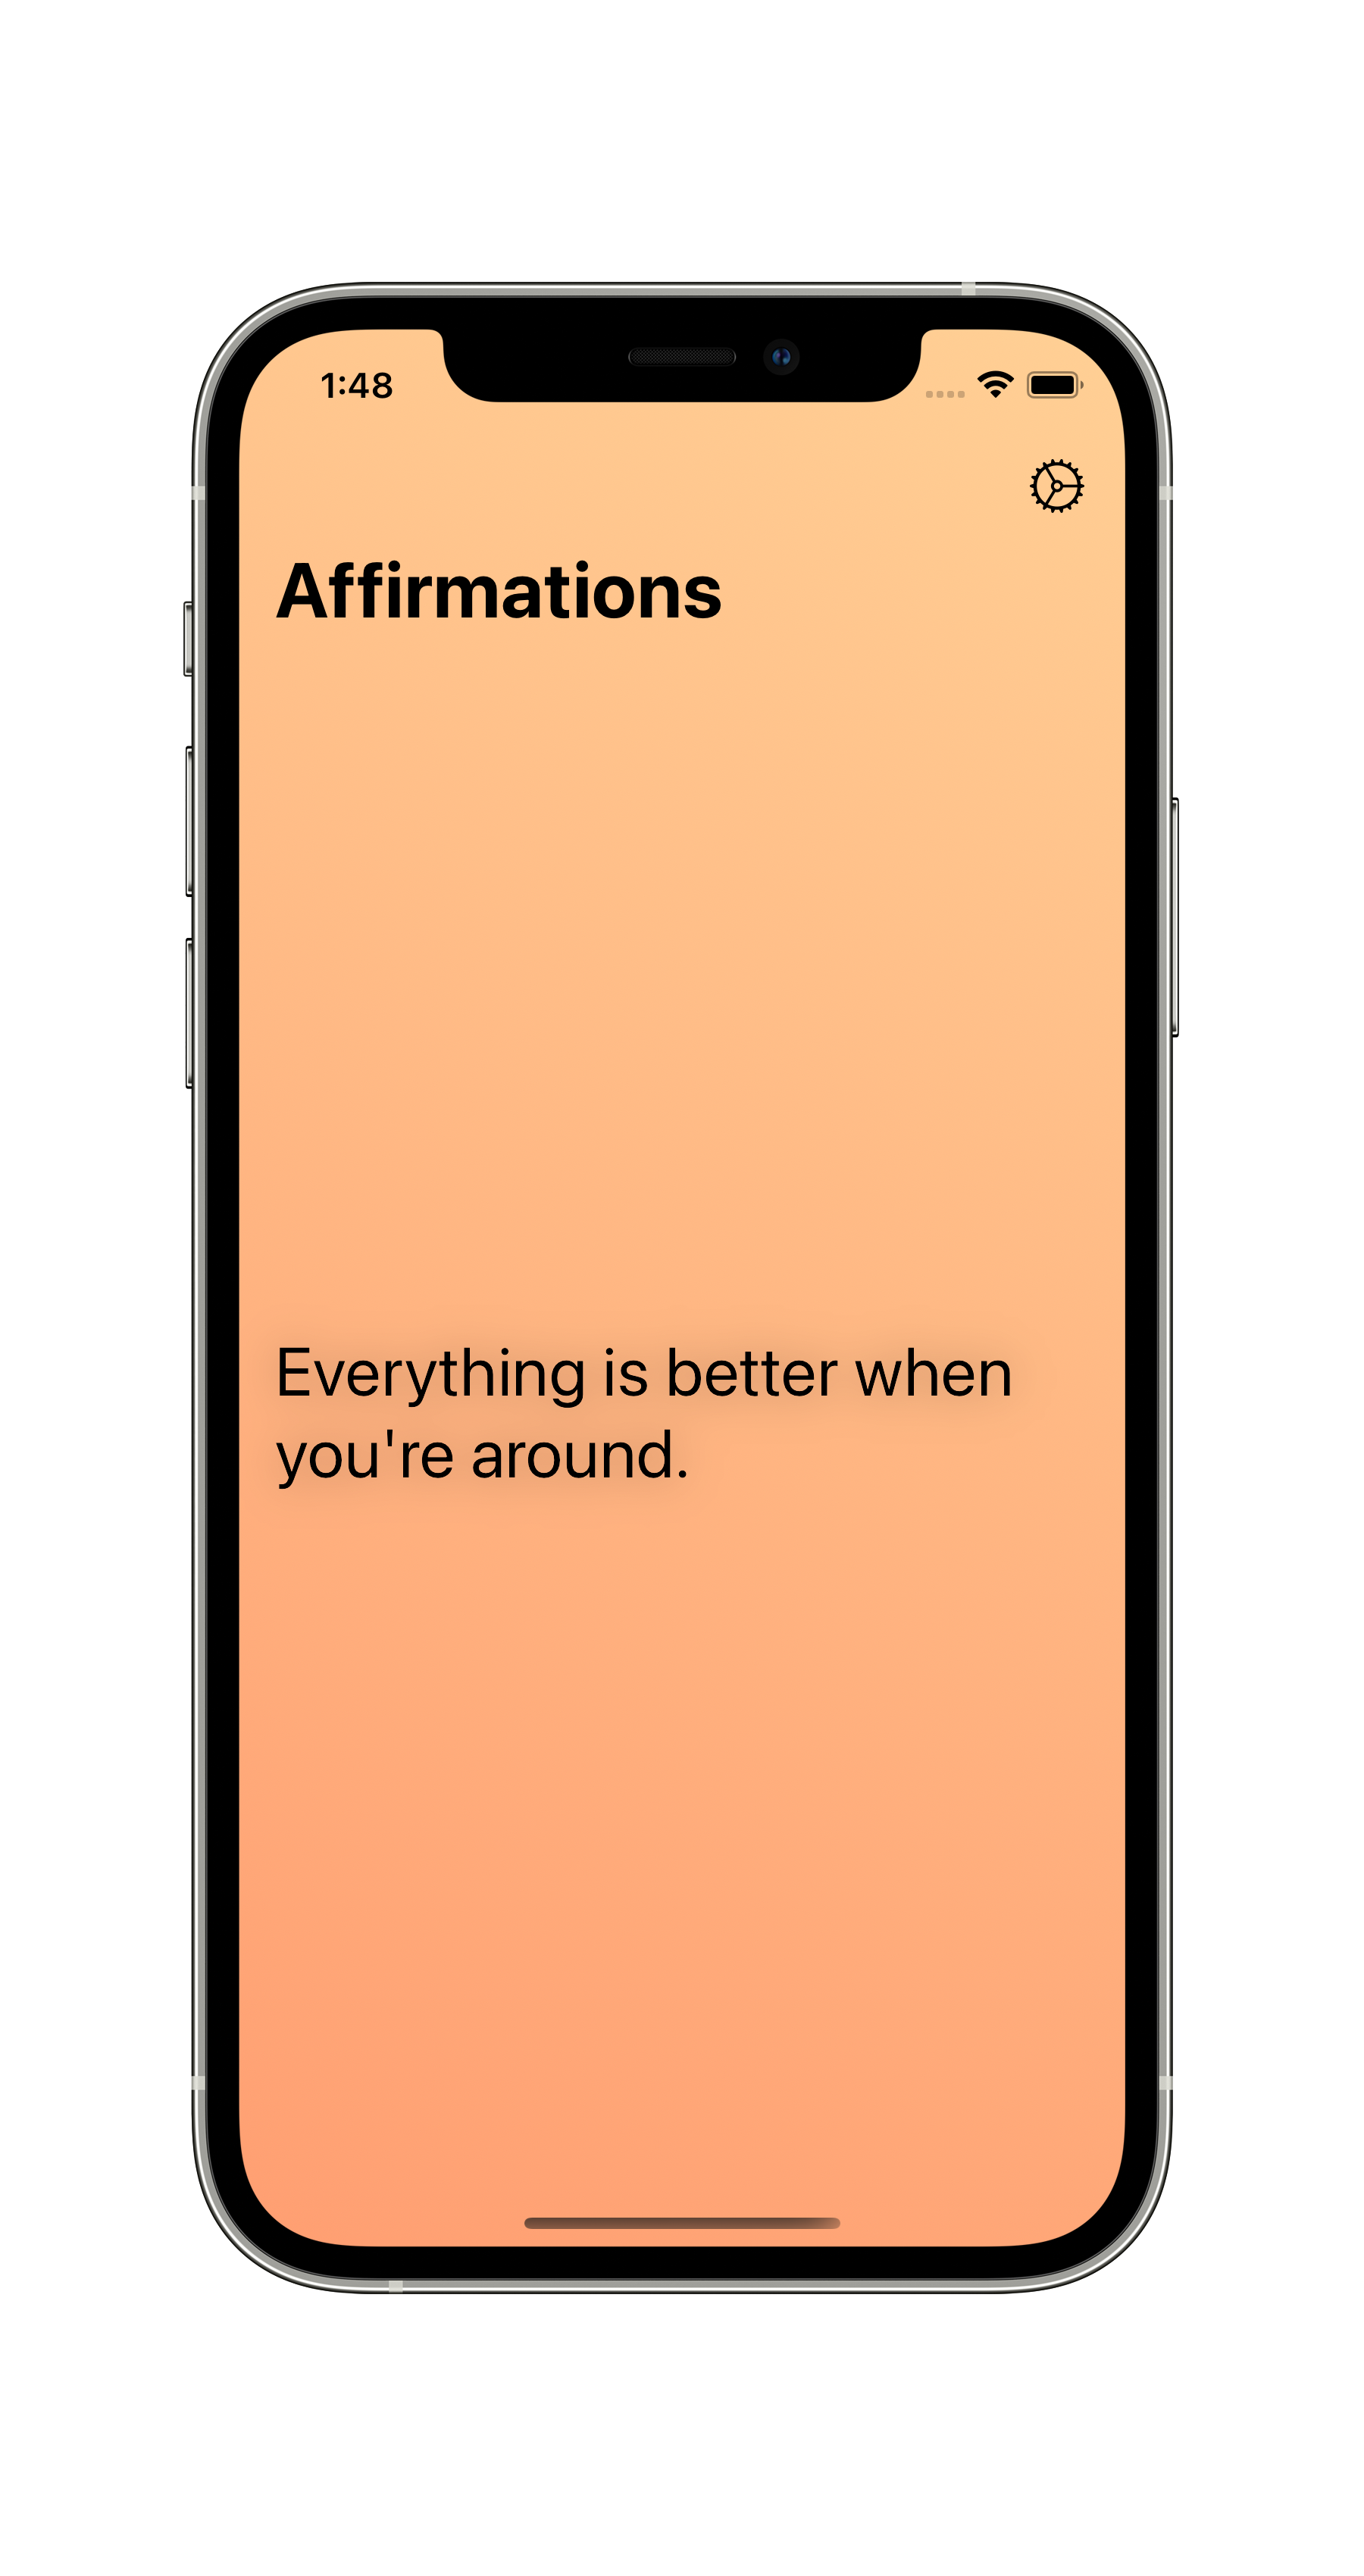 The main view of the app. It's a light orange background, and has the text \